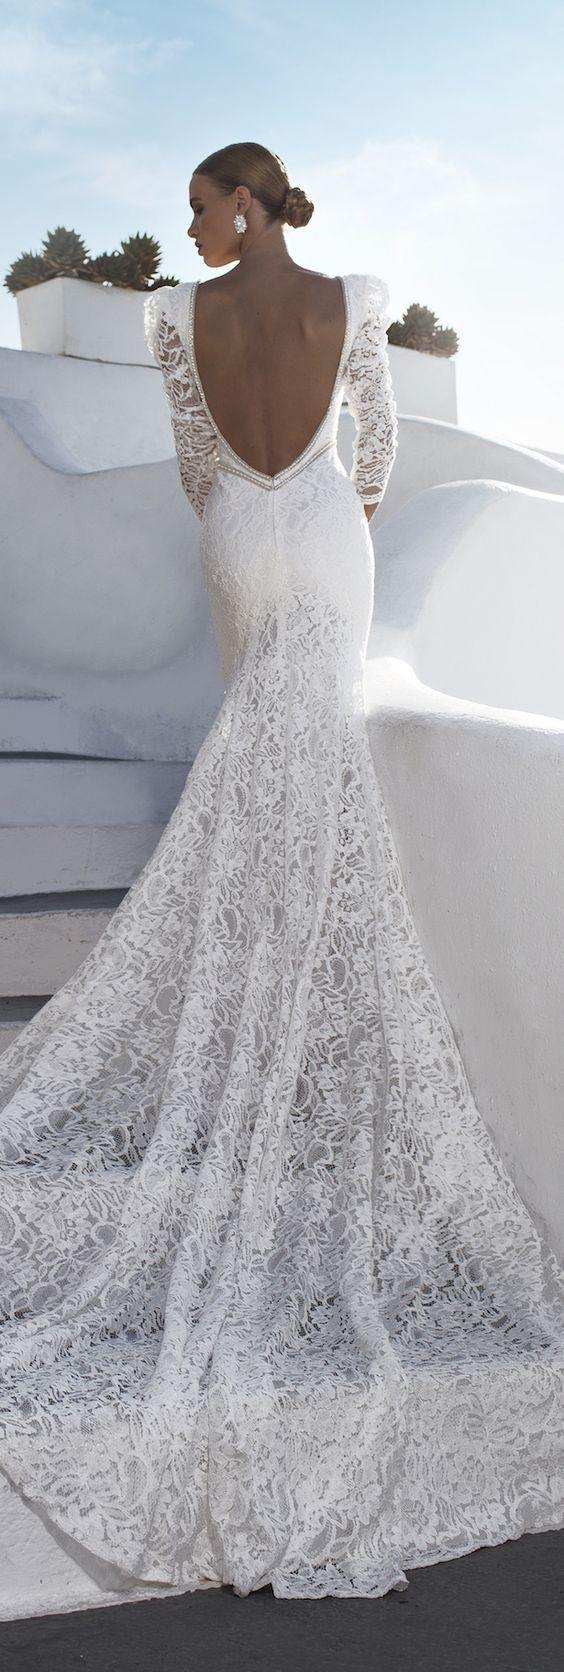 Mariage - 50 Beautiful Lace Wedding Dresses To Die For